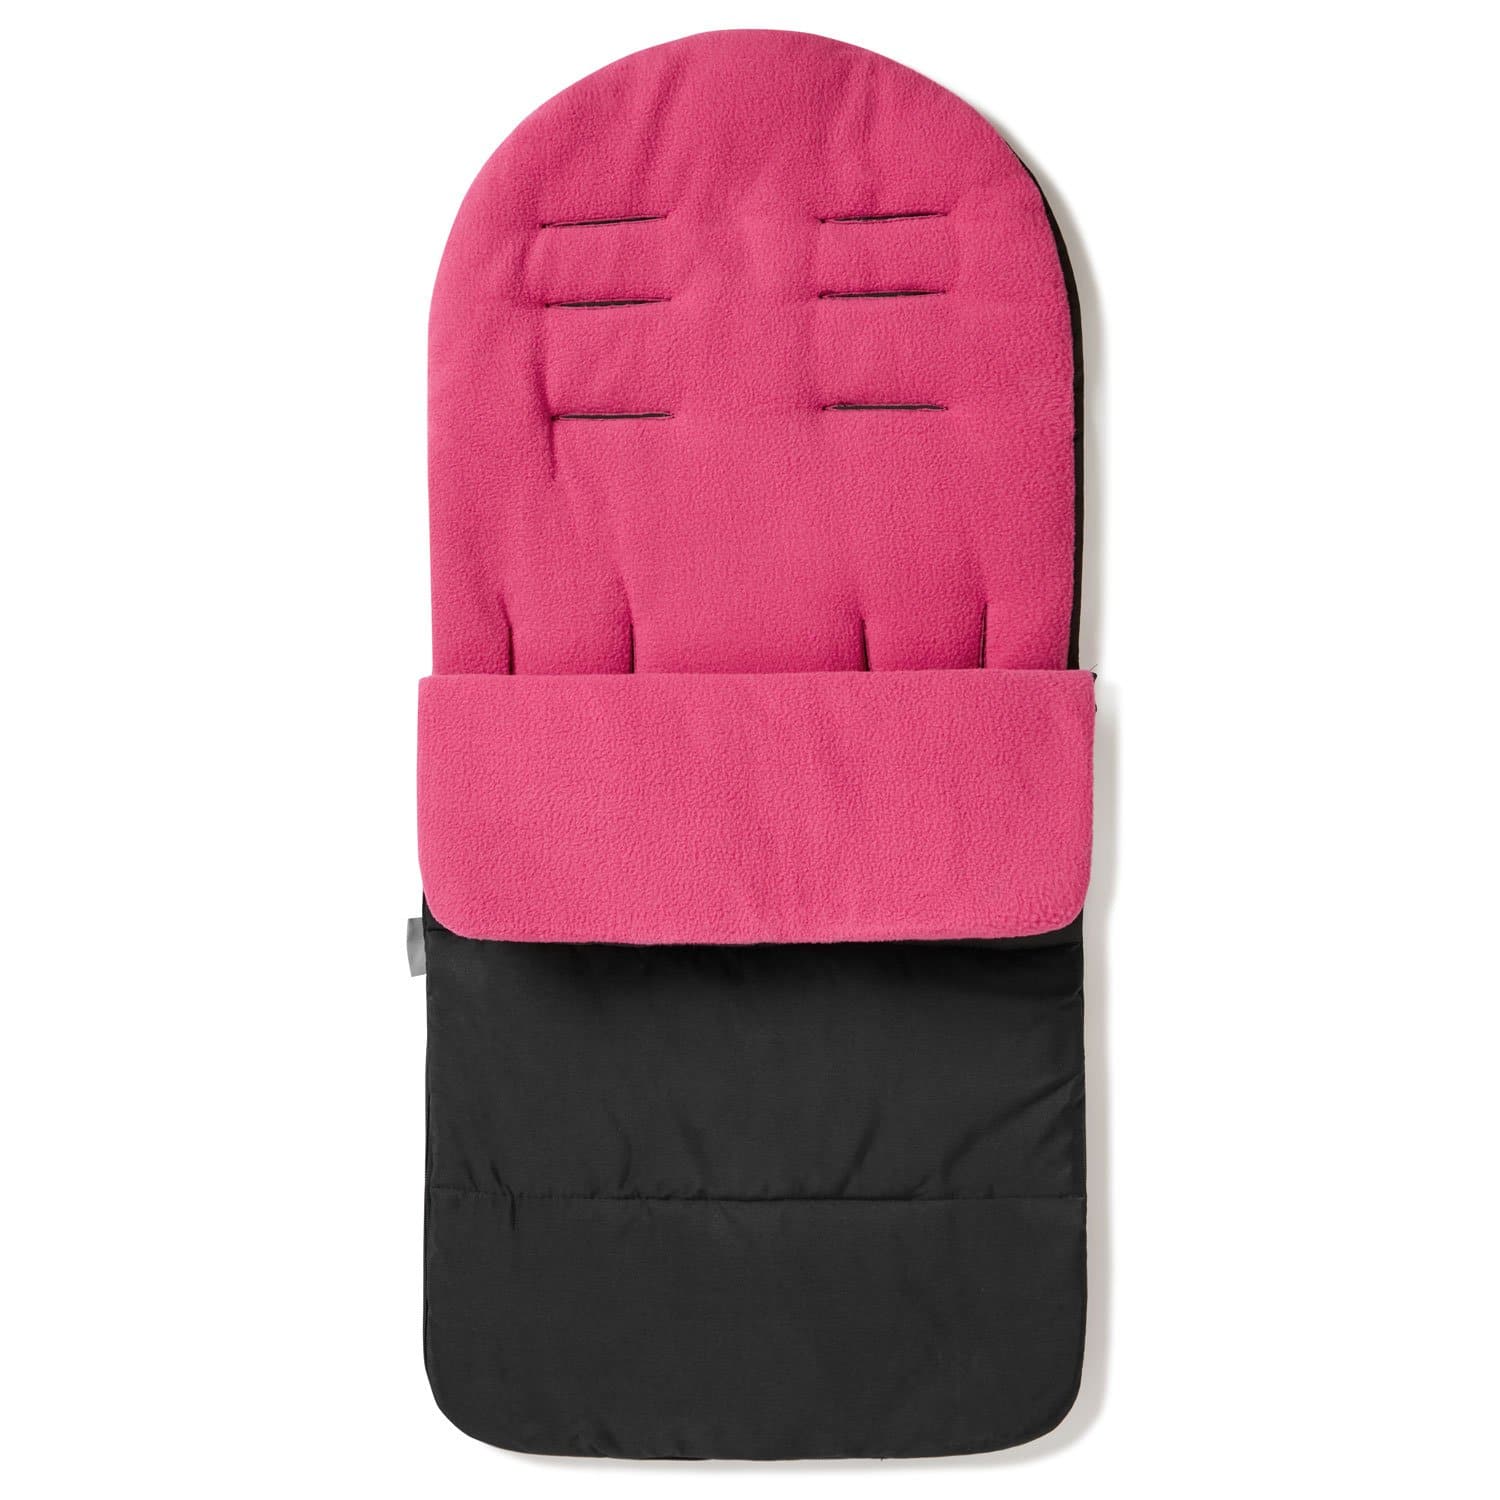 Premium Footmuff / Cosy Toes Compatible with Diono - For Your Little One